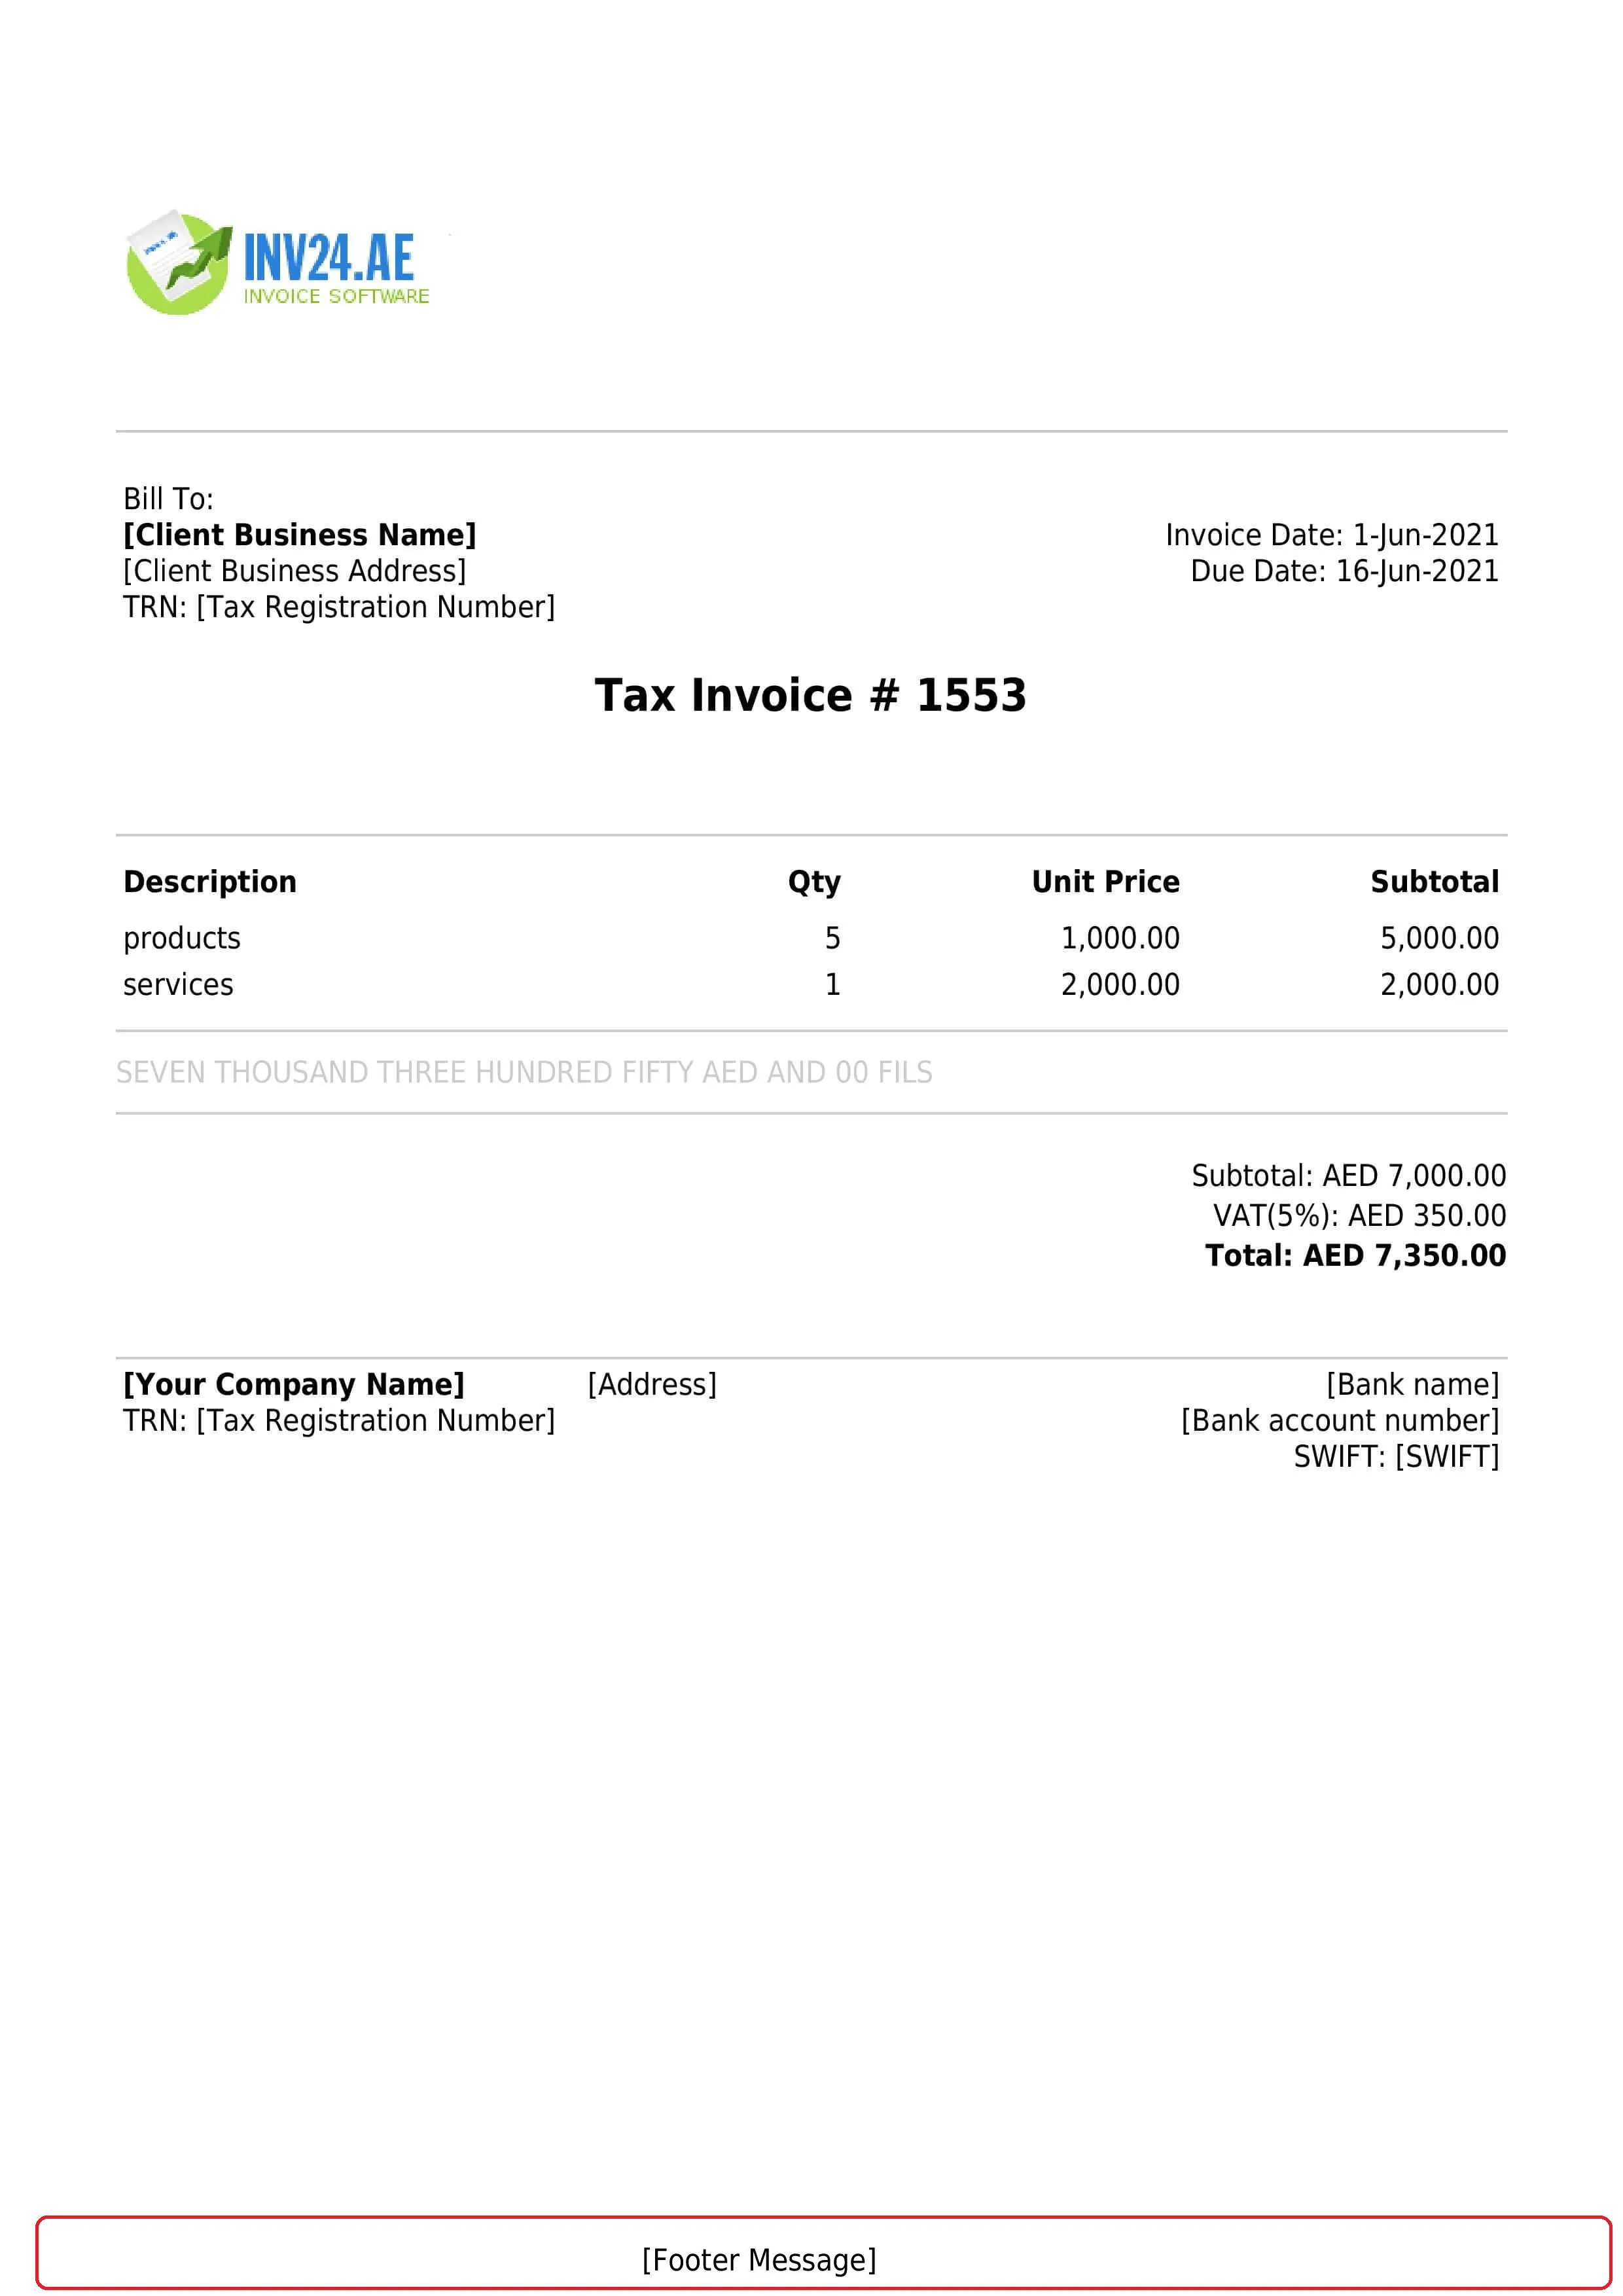 Invoice footer message